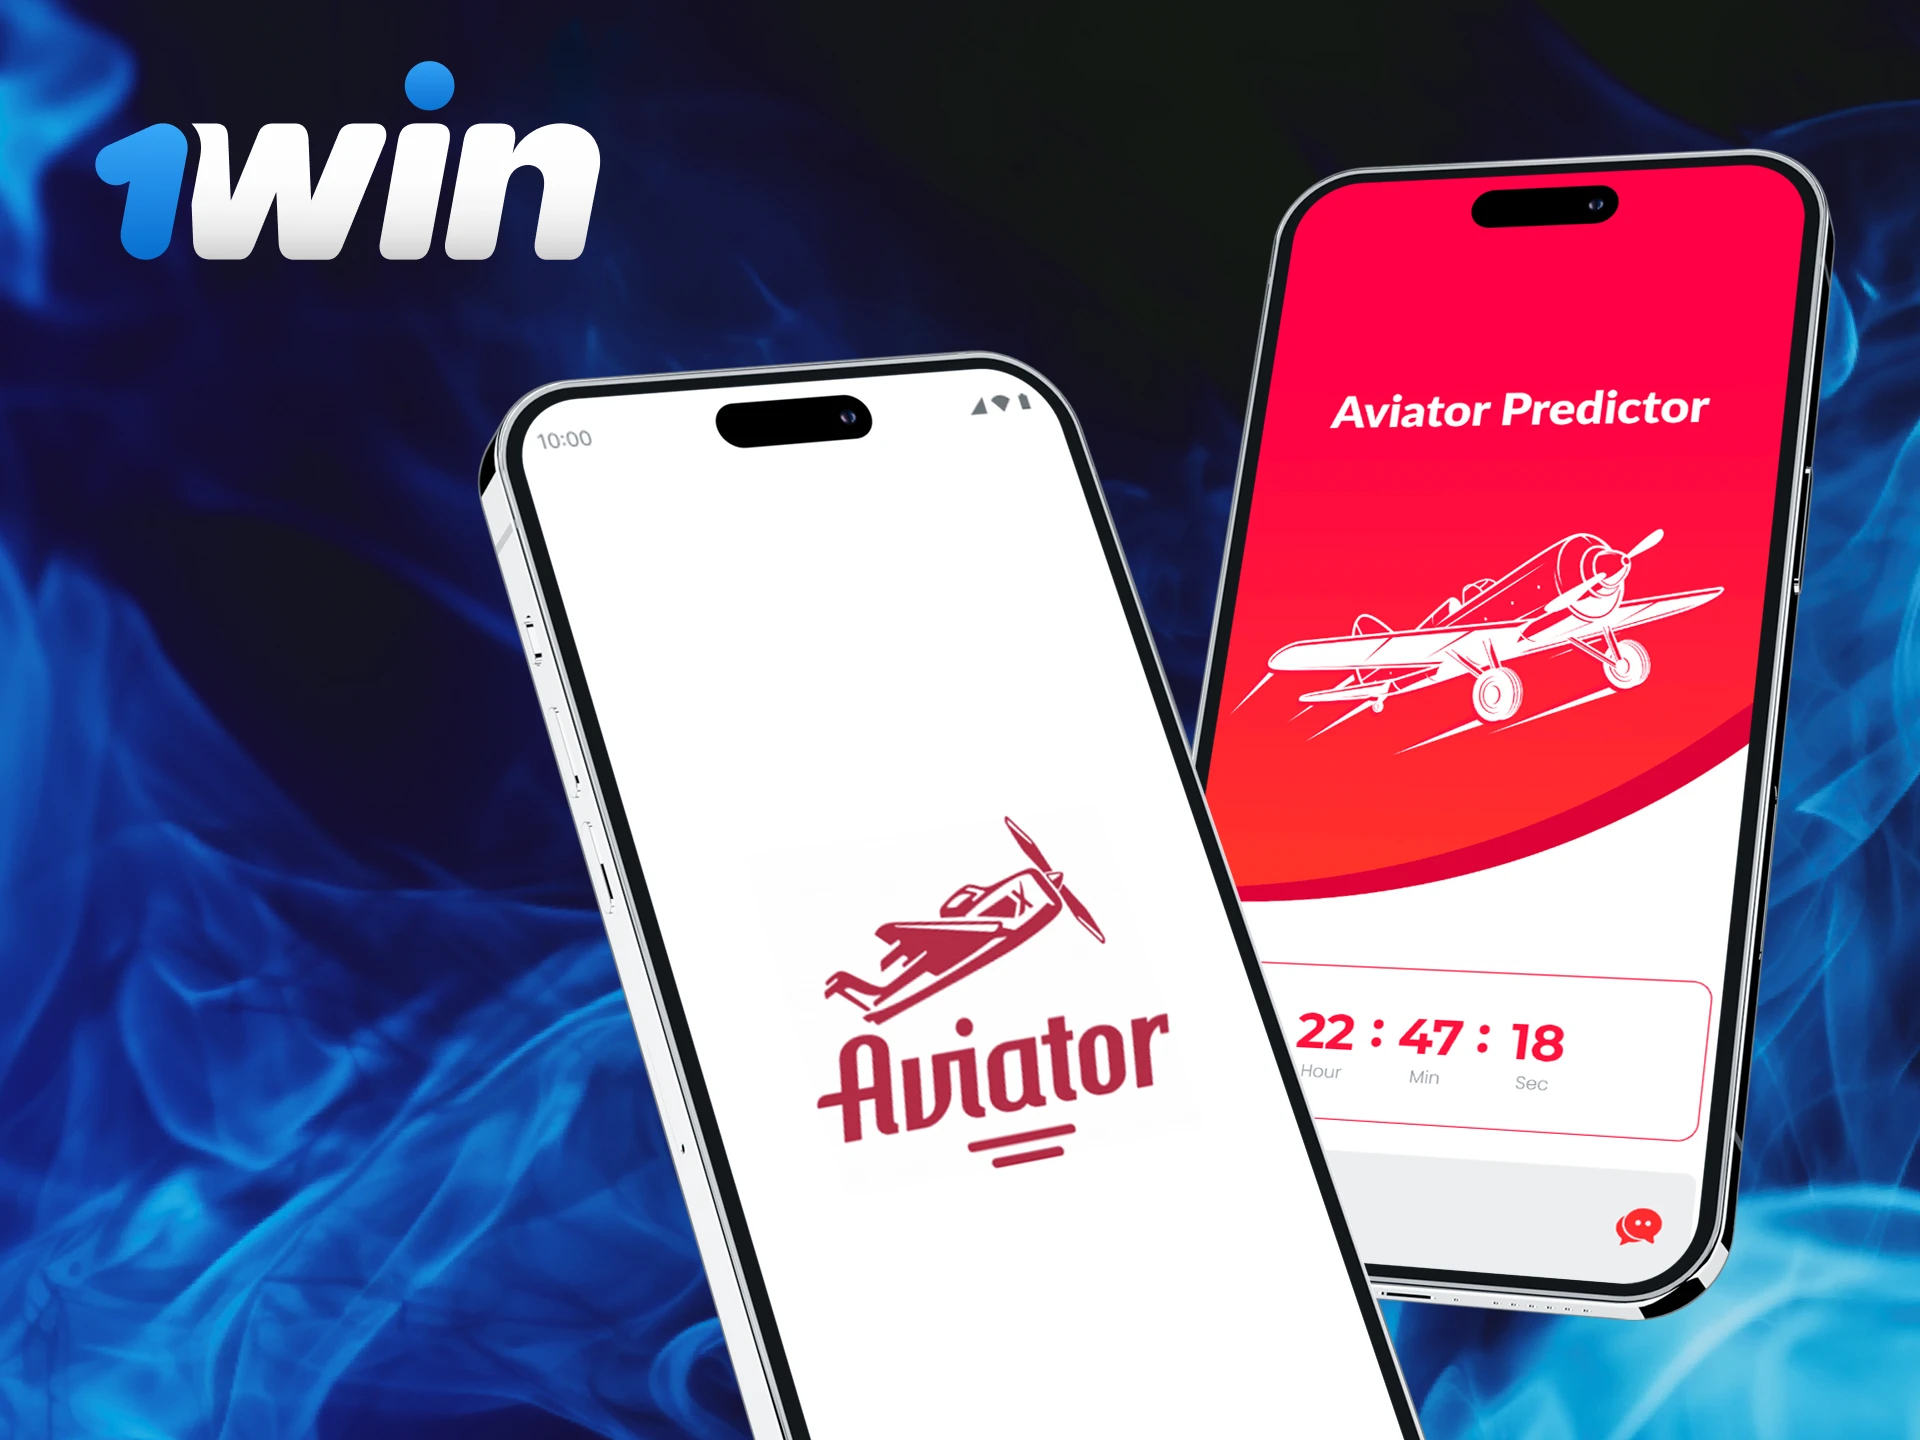 Predictor for Aviator at 1Win Casino is an application for predicting the next multiplier.